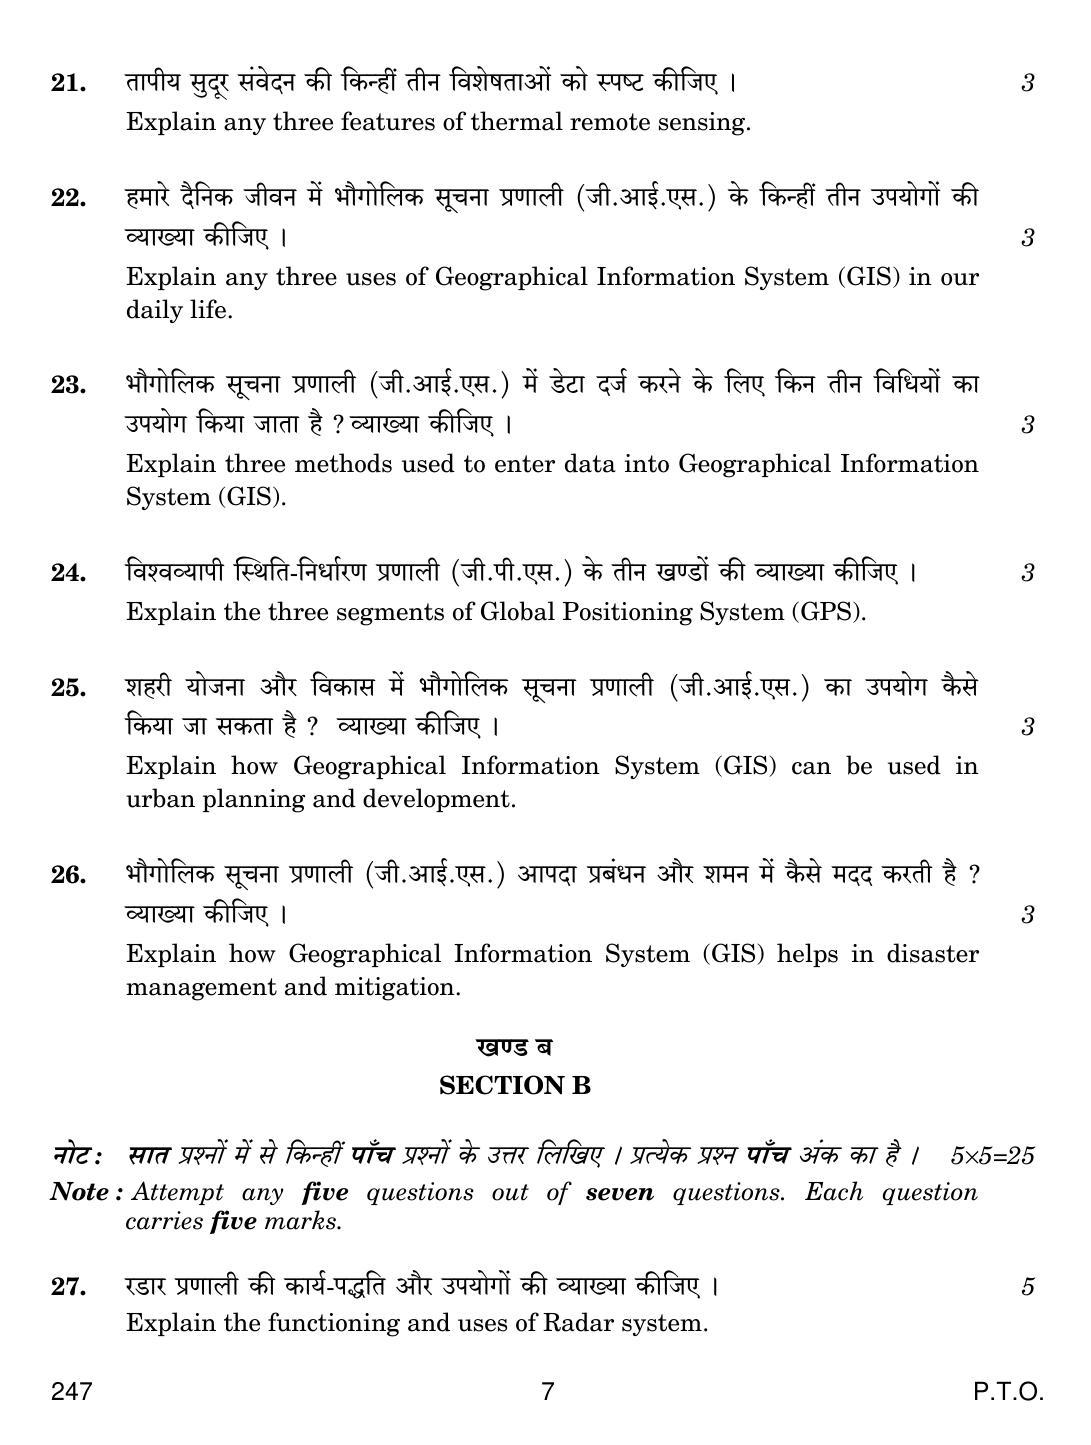 CBSE Class 12 247 Geospatial Technology 2019 Question Paper - Page 7